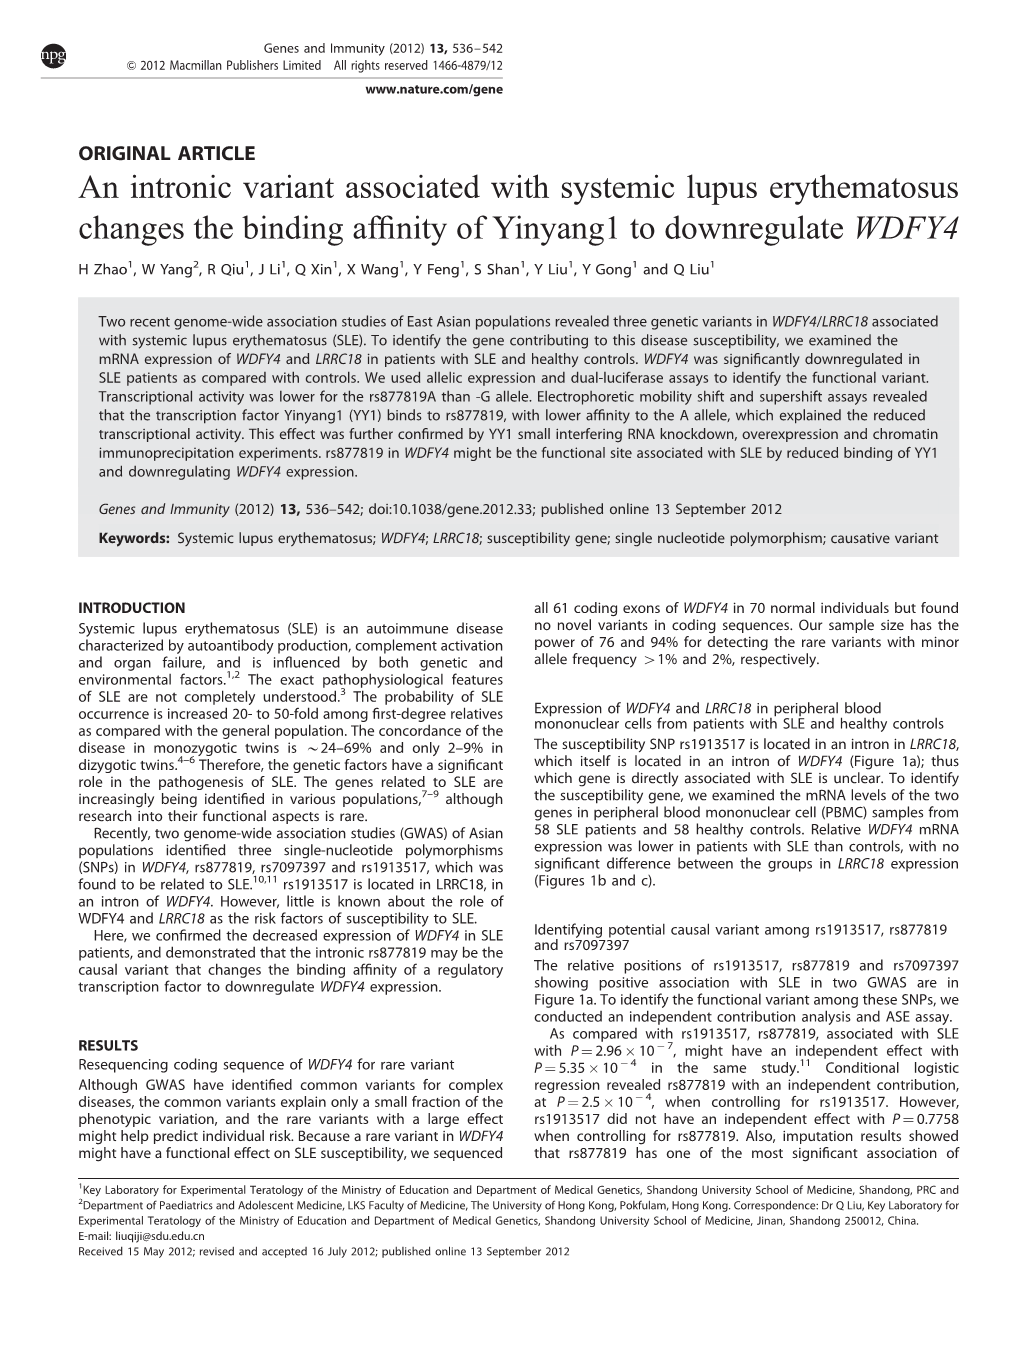 An Intronic Variant Associated with Systemic Lupus Erythematosus Changes the Binding Afﬁnity of Yinyang1 to Downregulate WDFY4